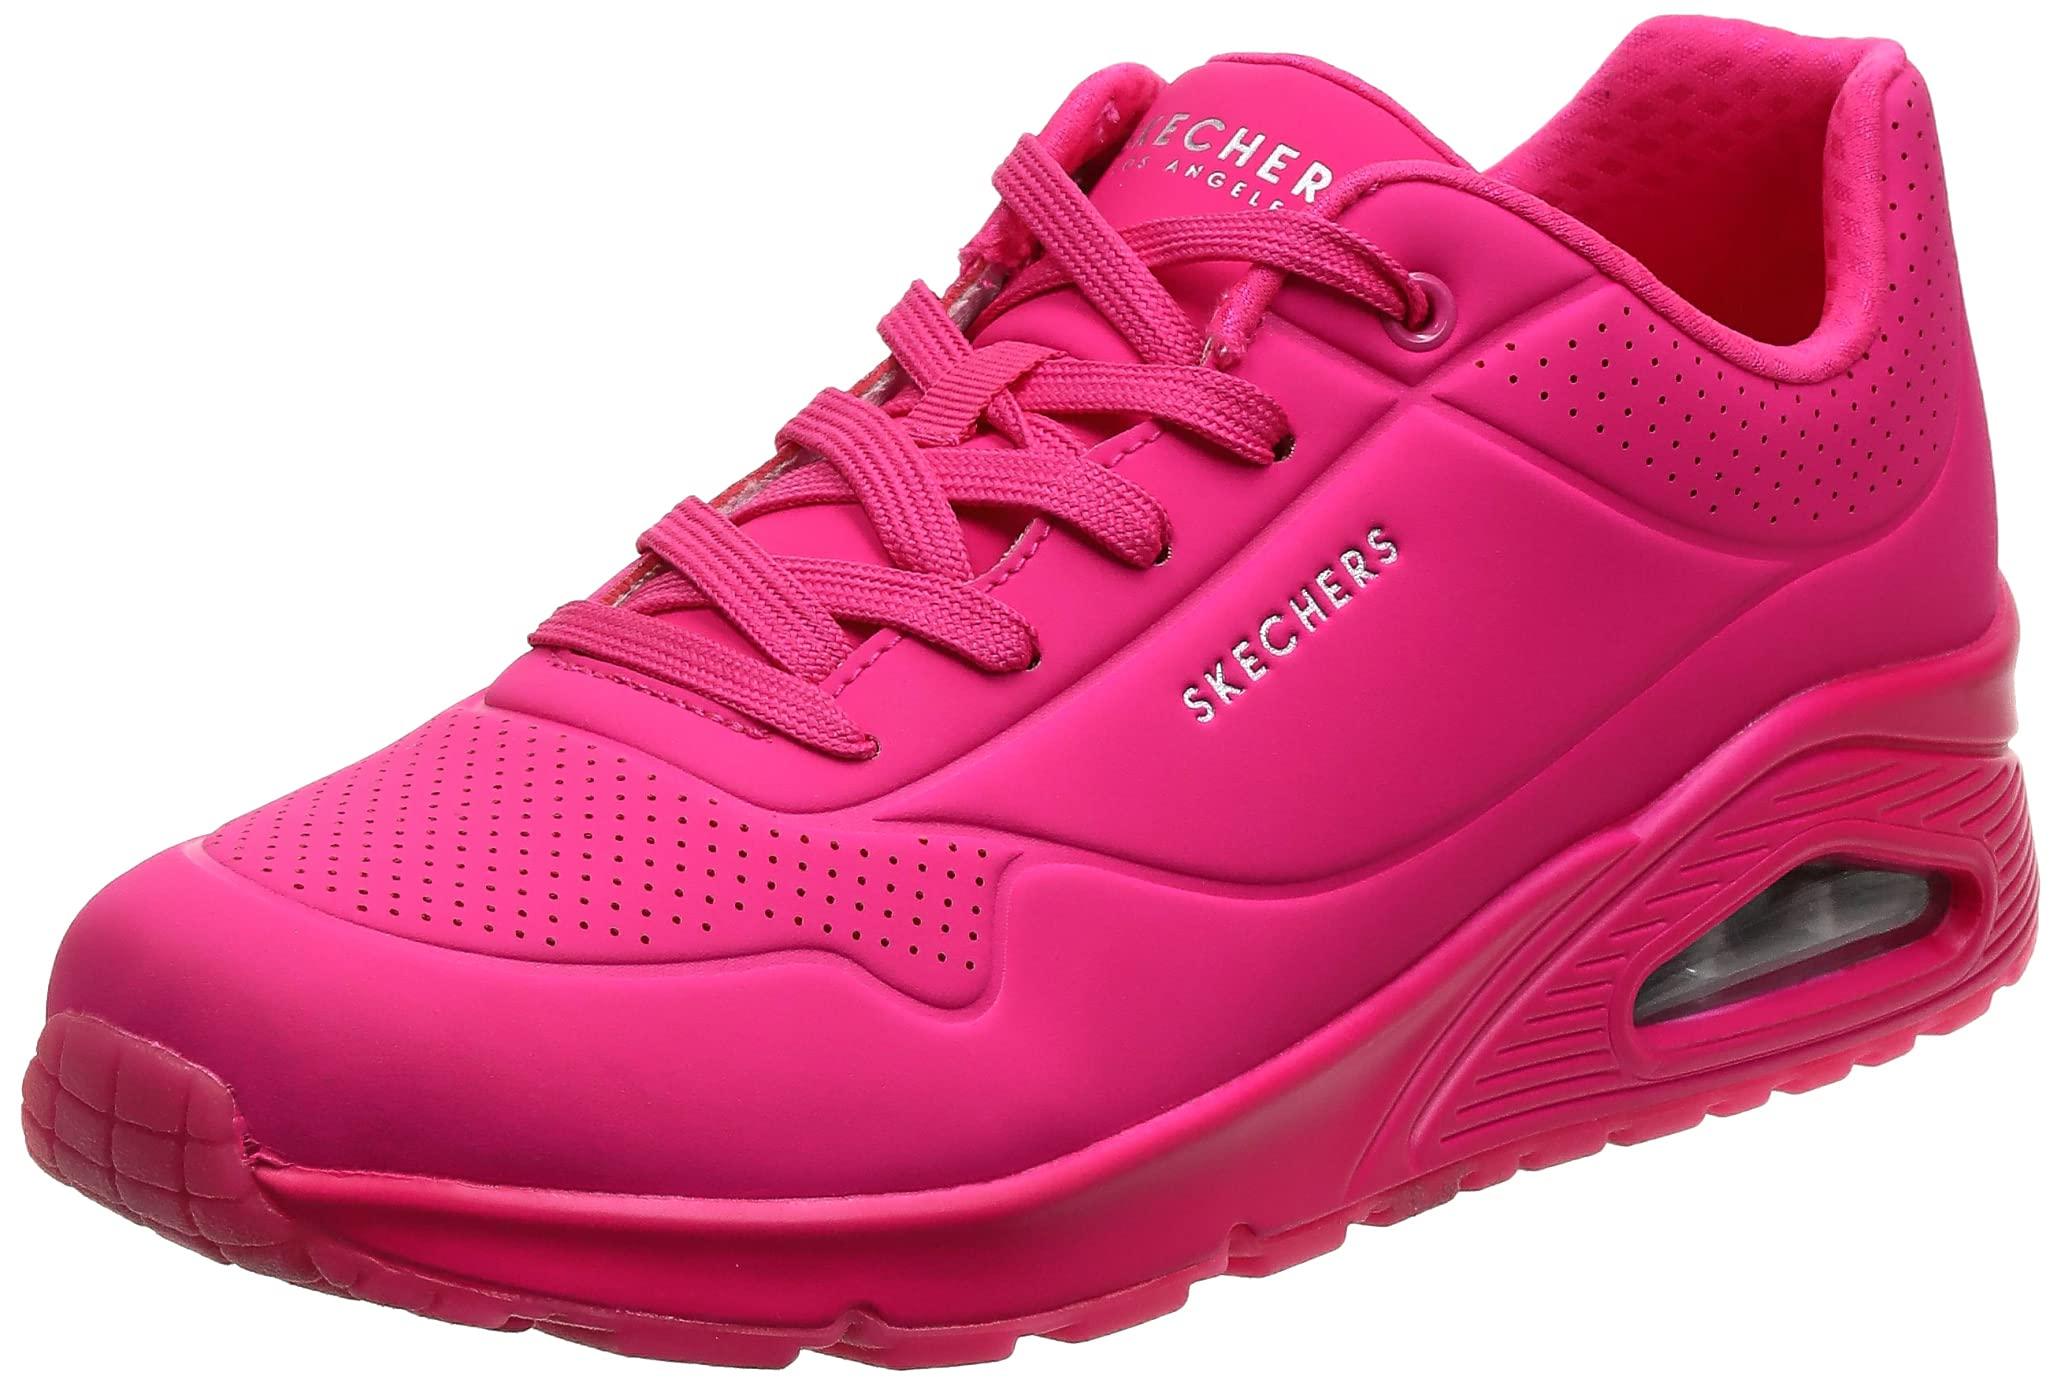 Skechers Night Shades in Hot Pink (Pink) - Lyst